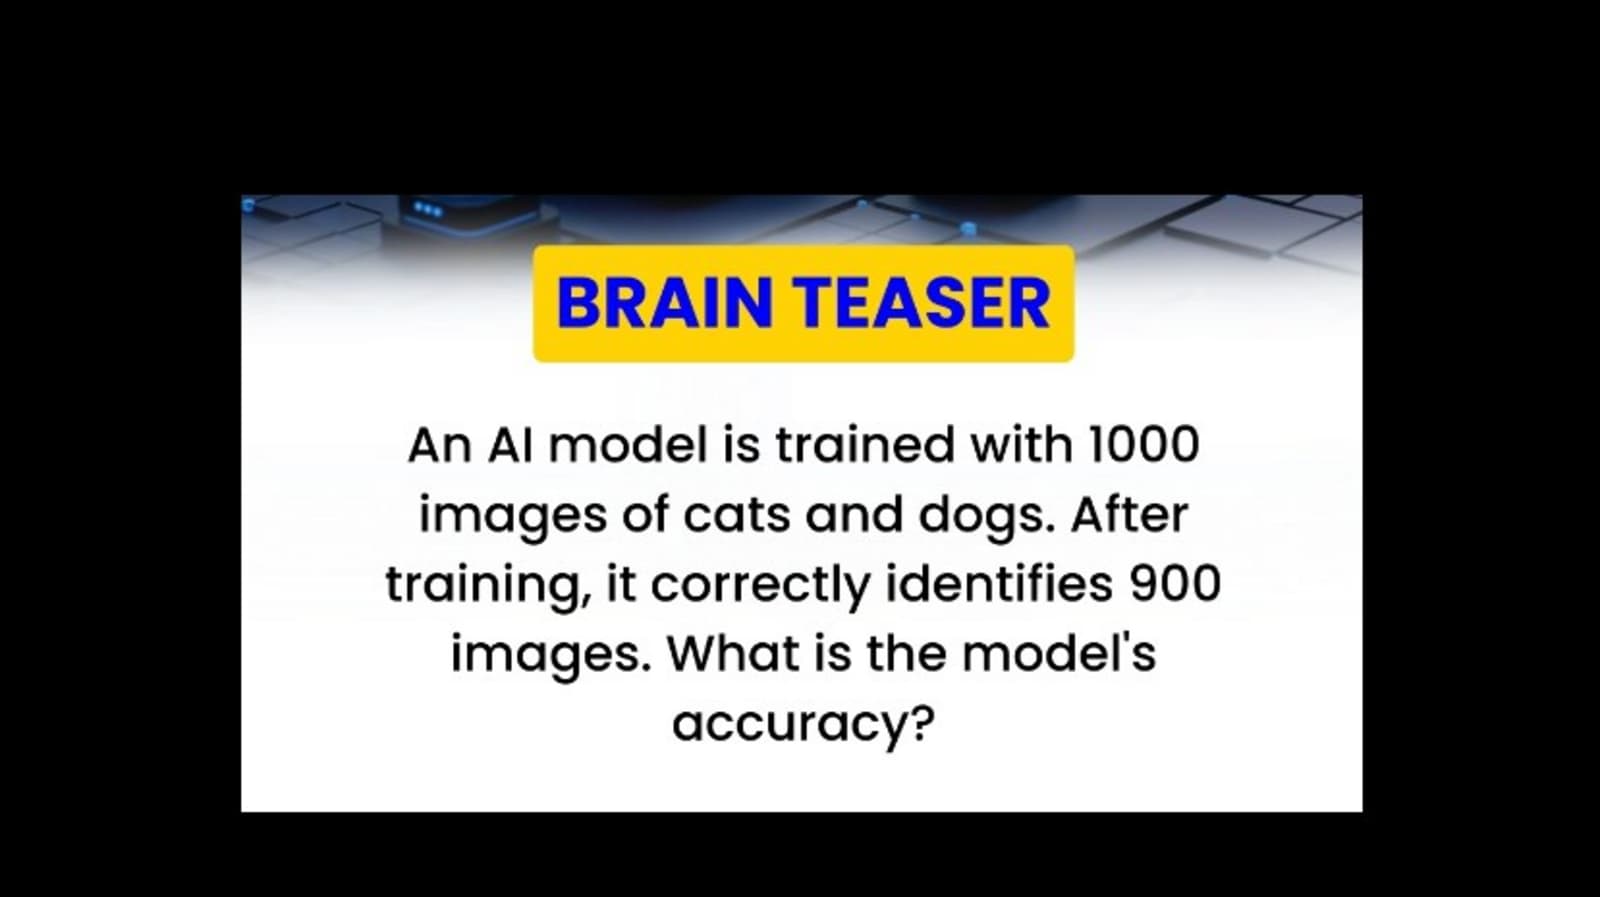 Test your mind power with this AI-related brain teaser. Can you solve it?